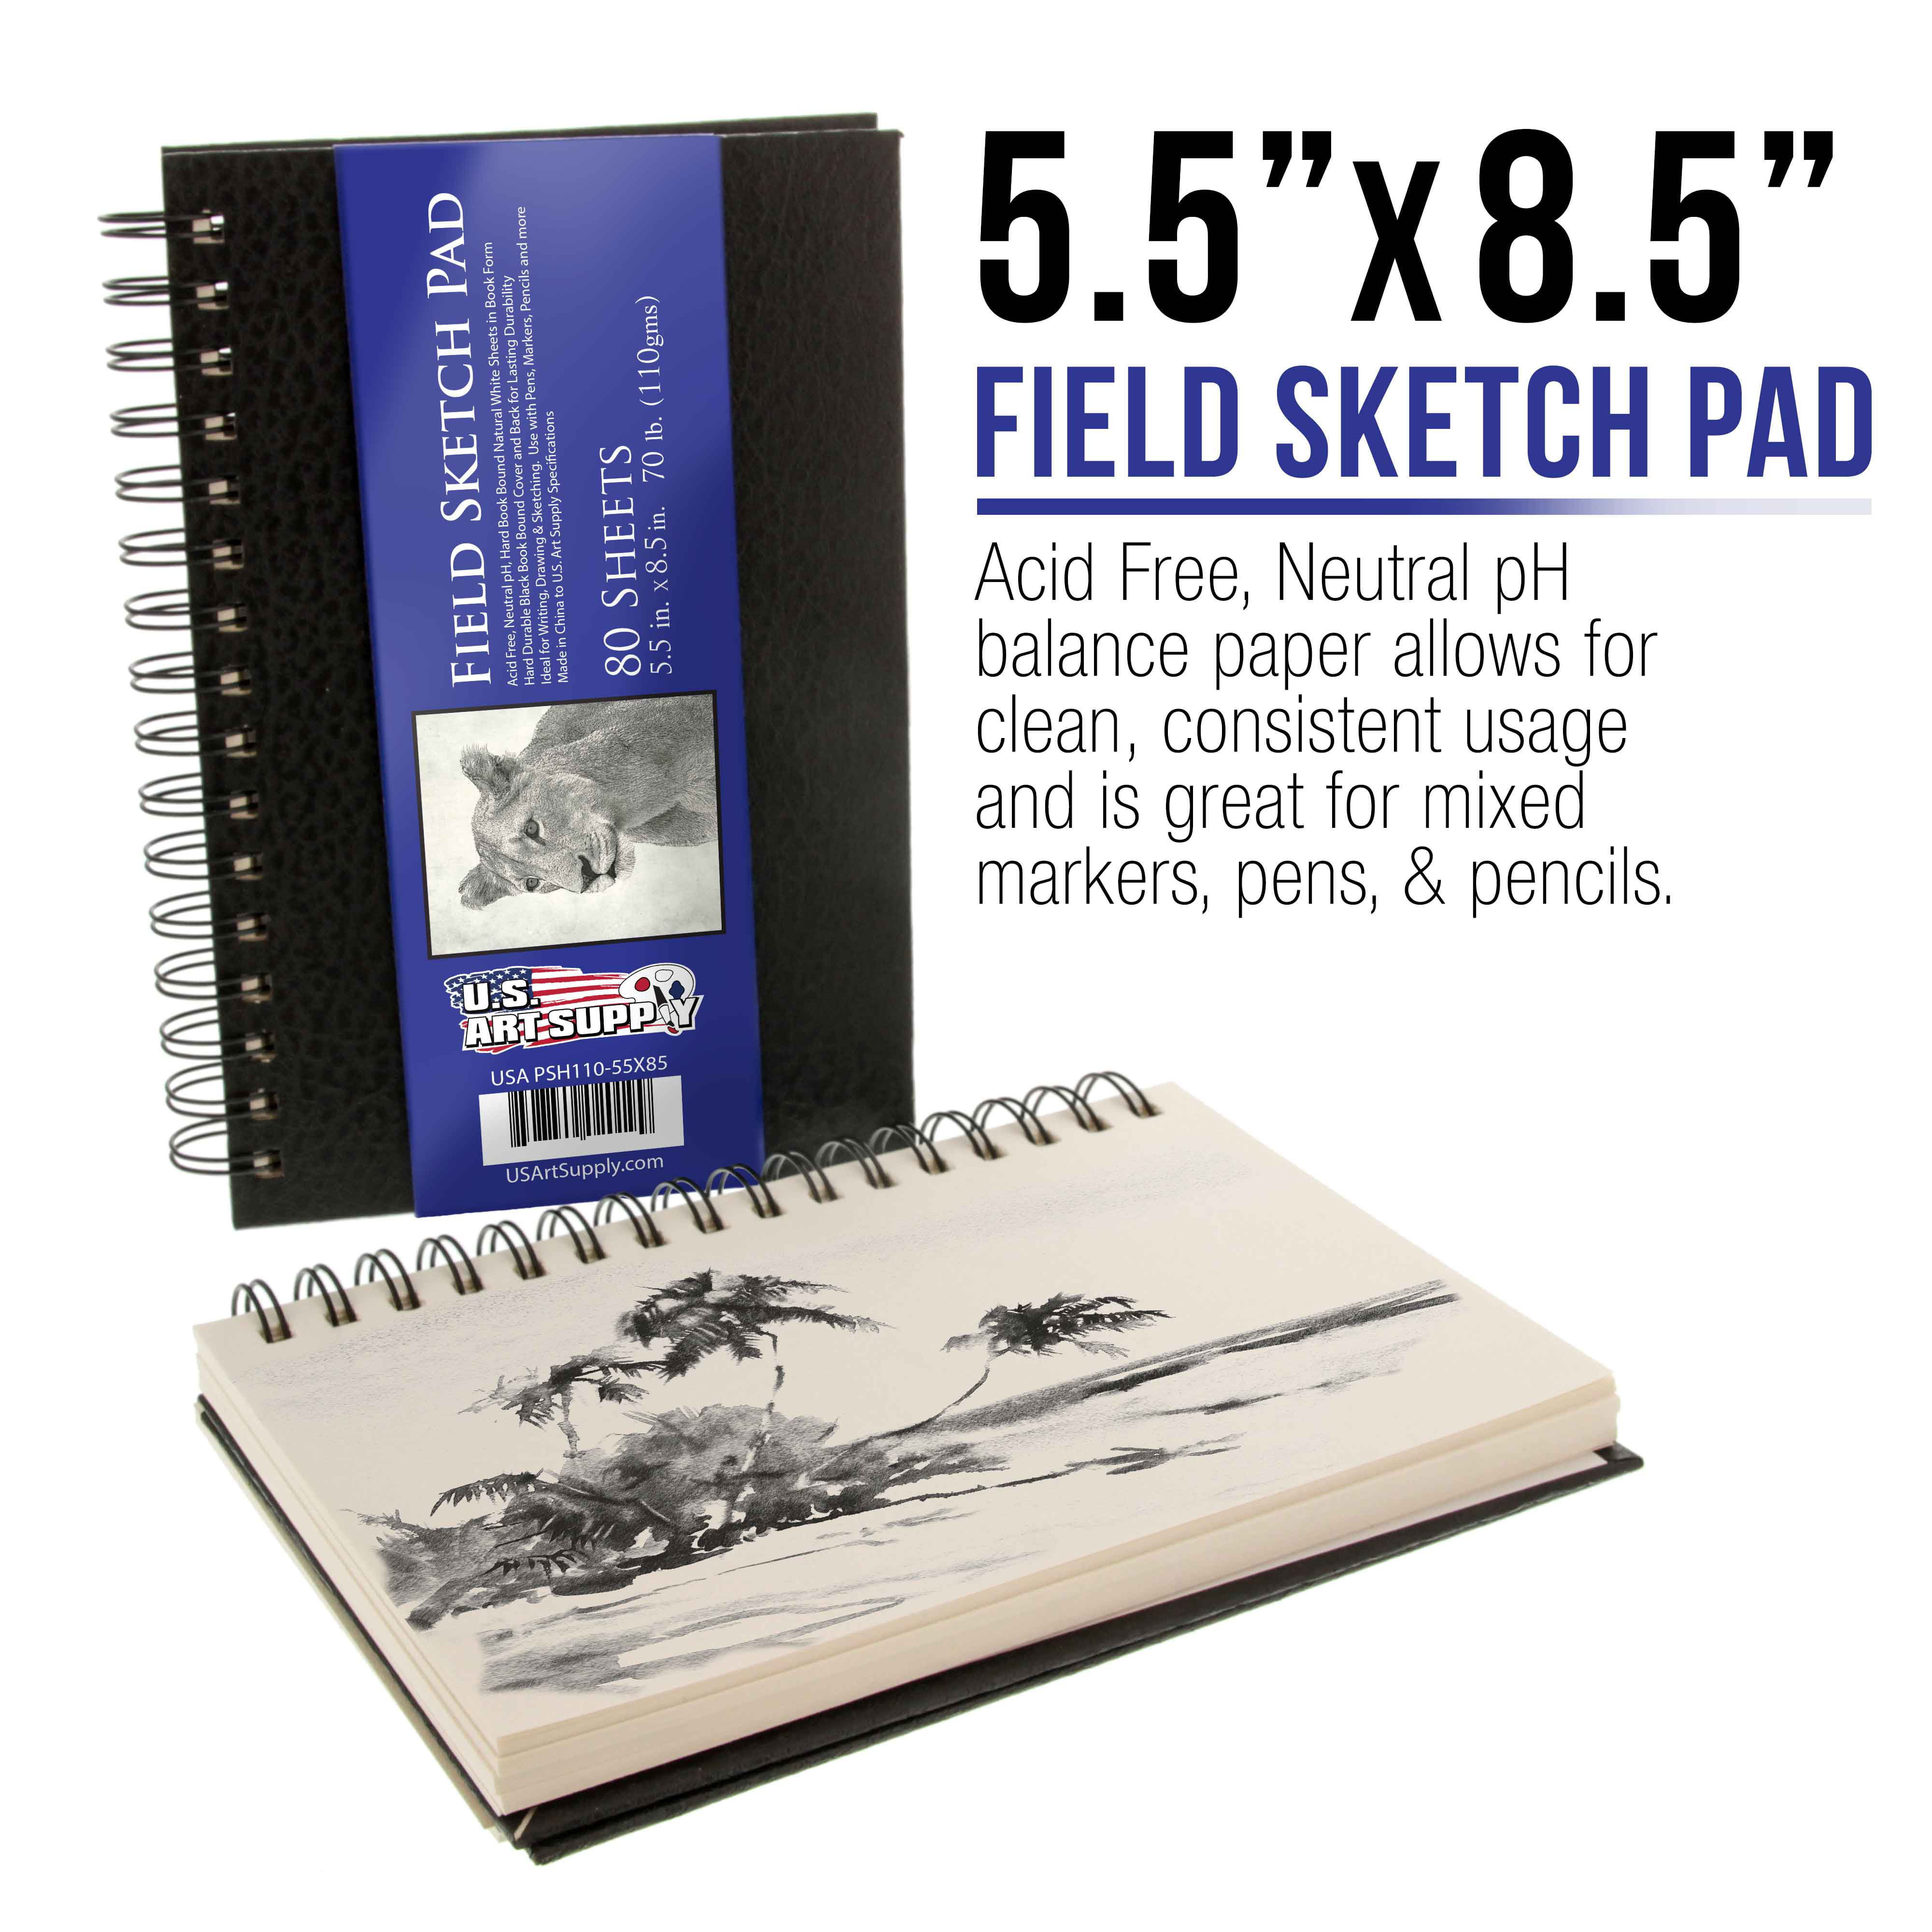 Sketch Books, Hard-Bound,<br>4 x 6 - 110 sheets (220 pages)